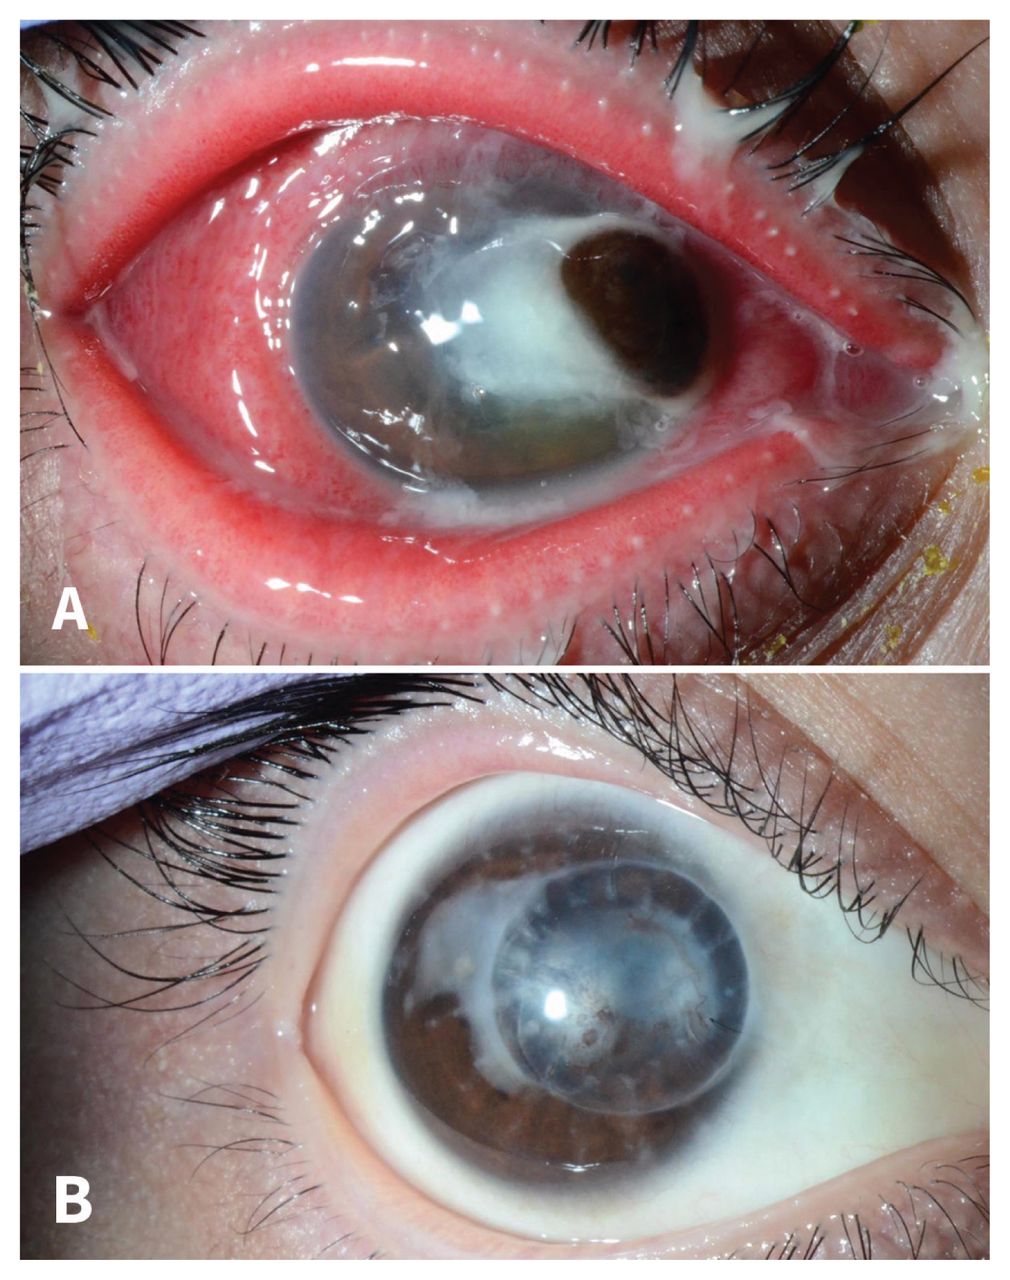 Risk factors, clinical features and outcomes of Neisseria keratitis